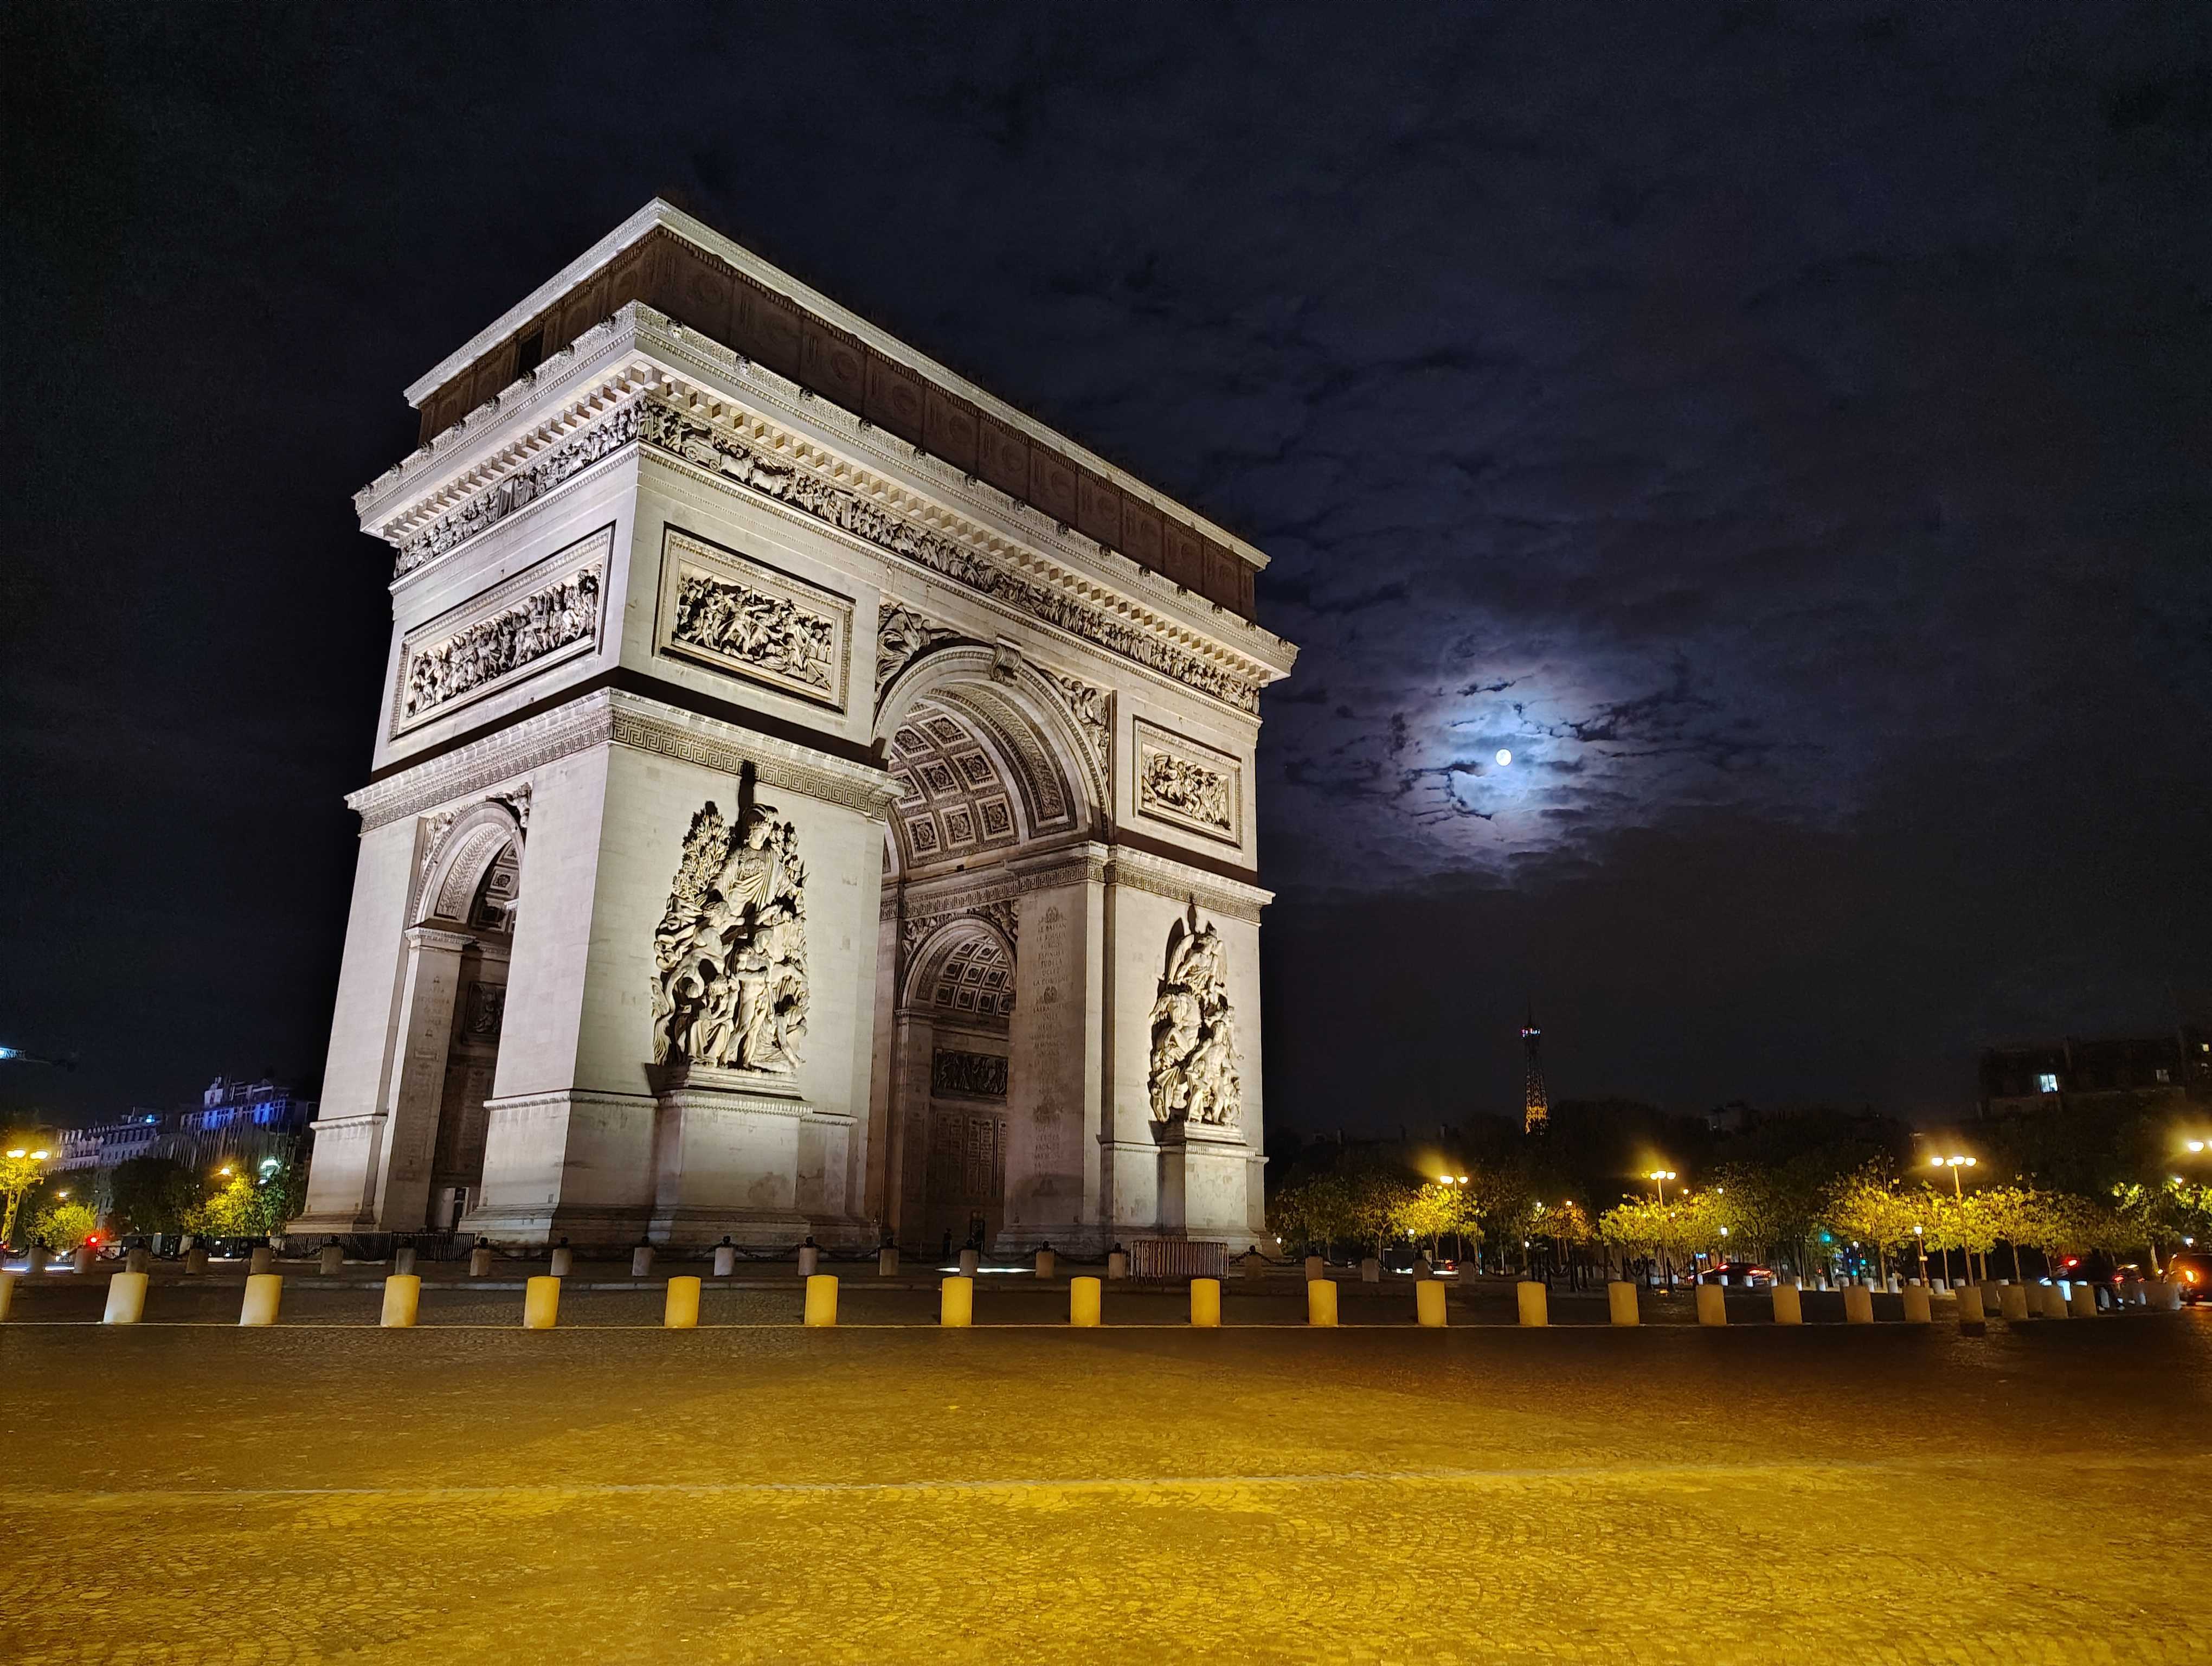 A large monument at night with the moon shining